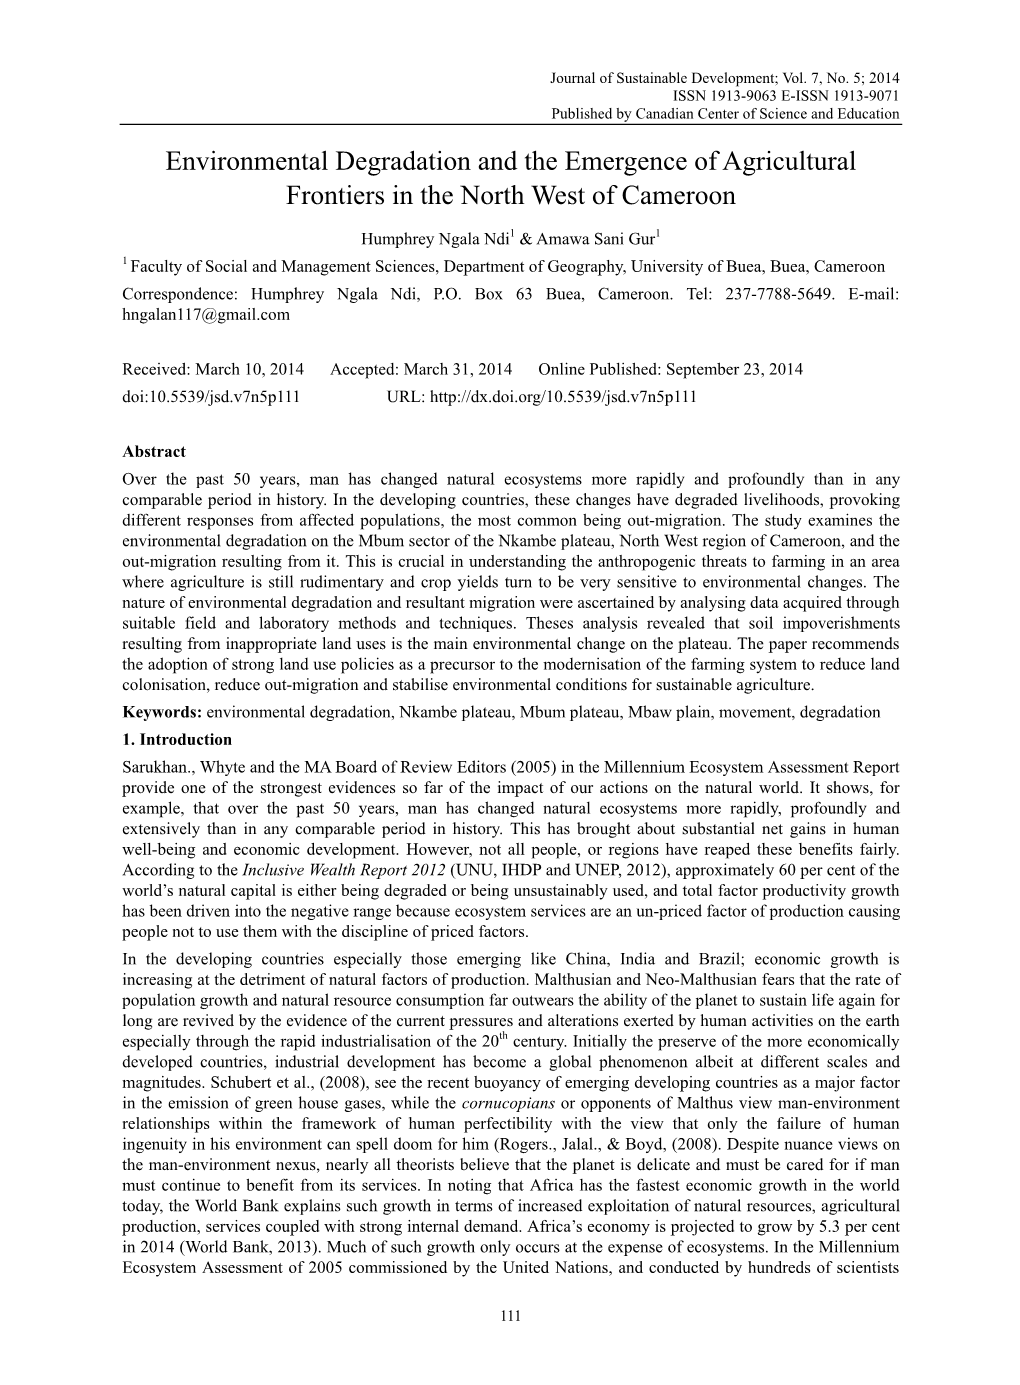 Environmental Degradation and the Emergence of Agricultural Frontiers in the North West of Cameroon